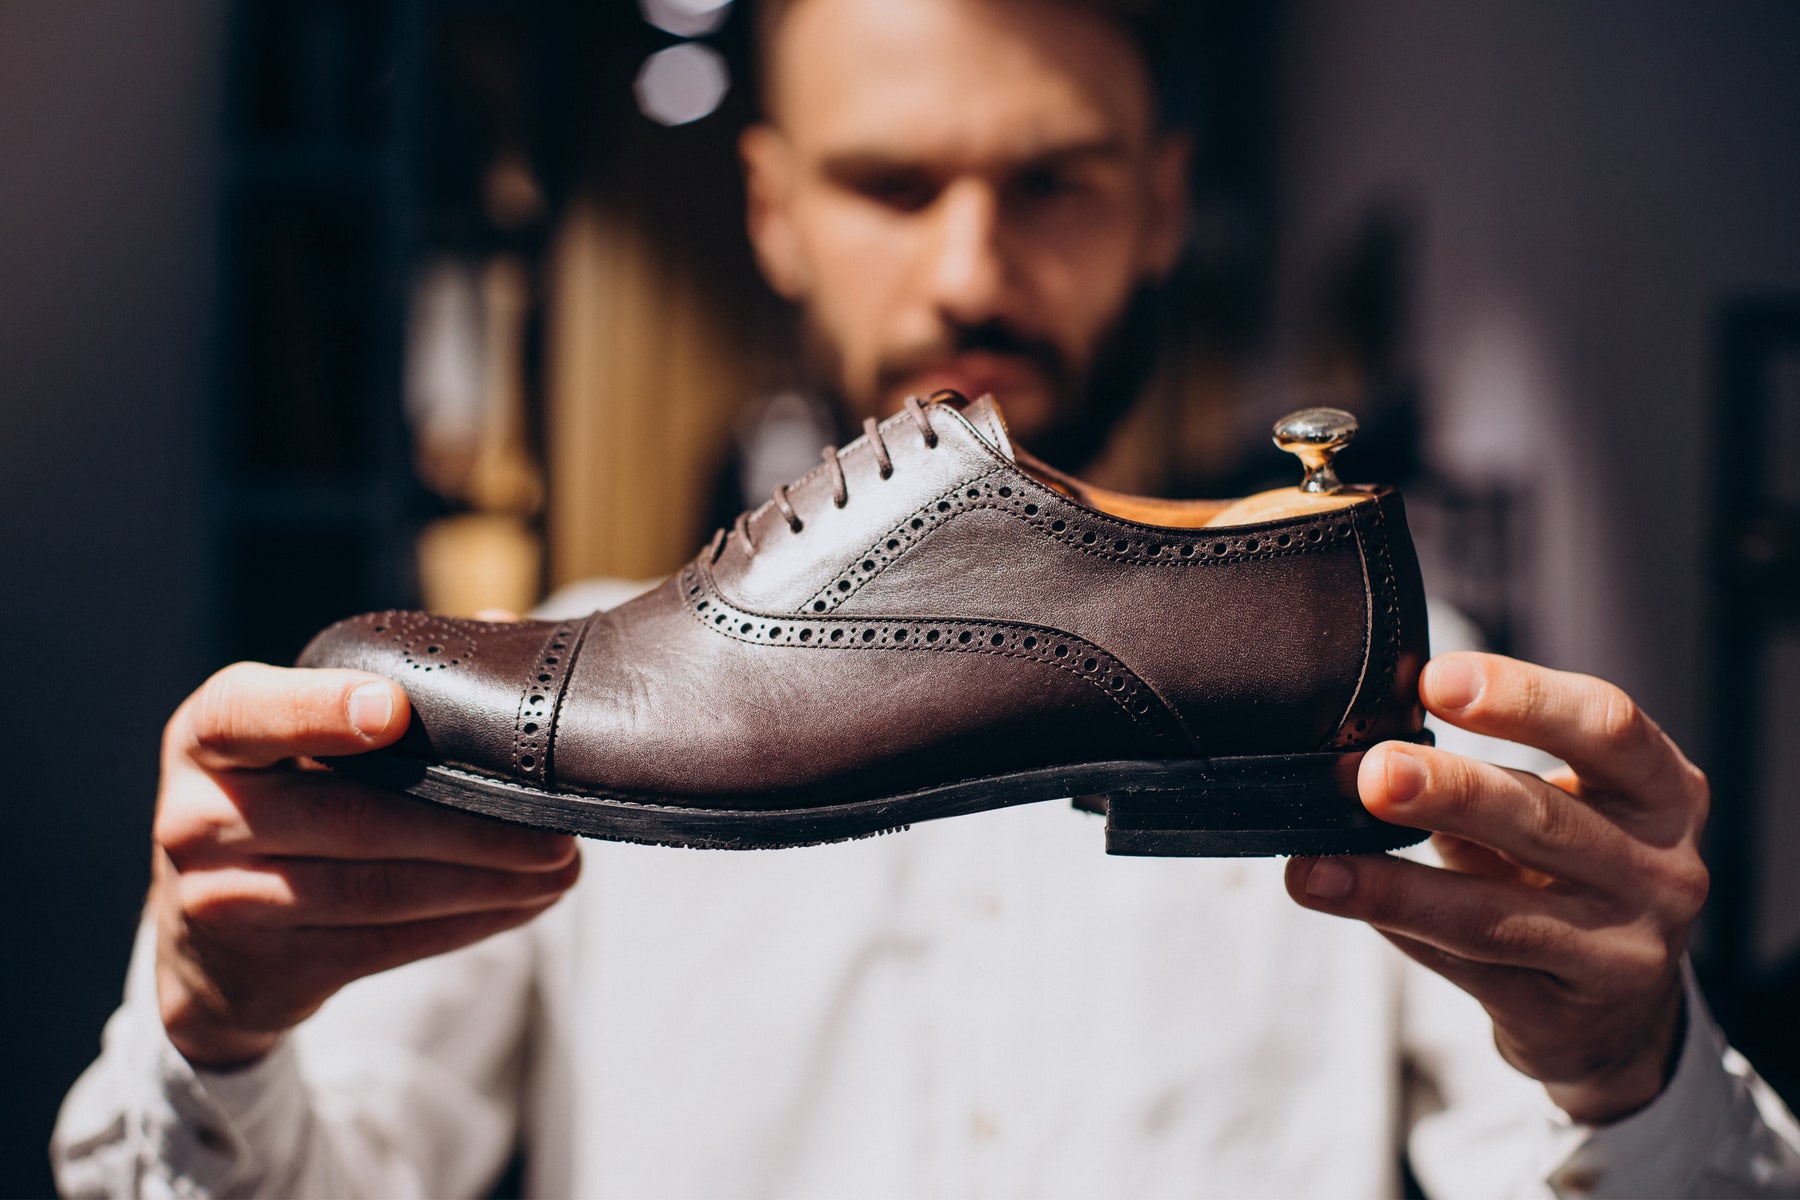 Barker Shoes USA | Official Website | English Shoemakers Since 1880